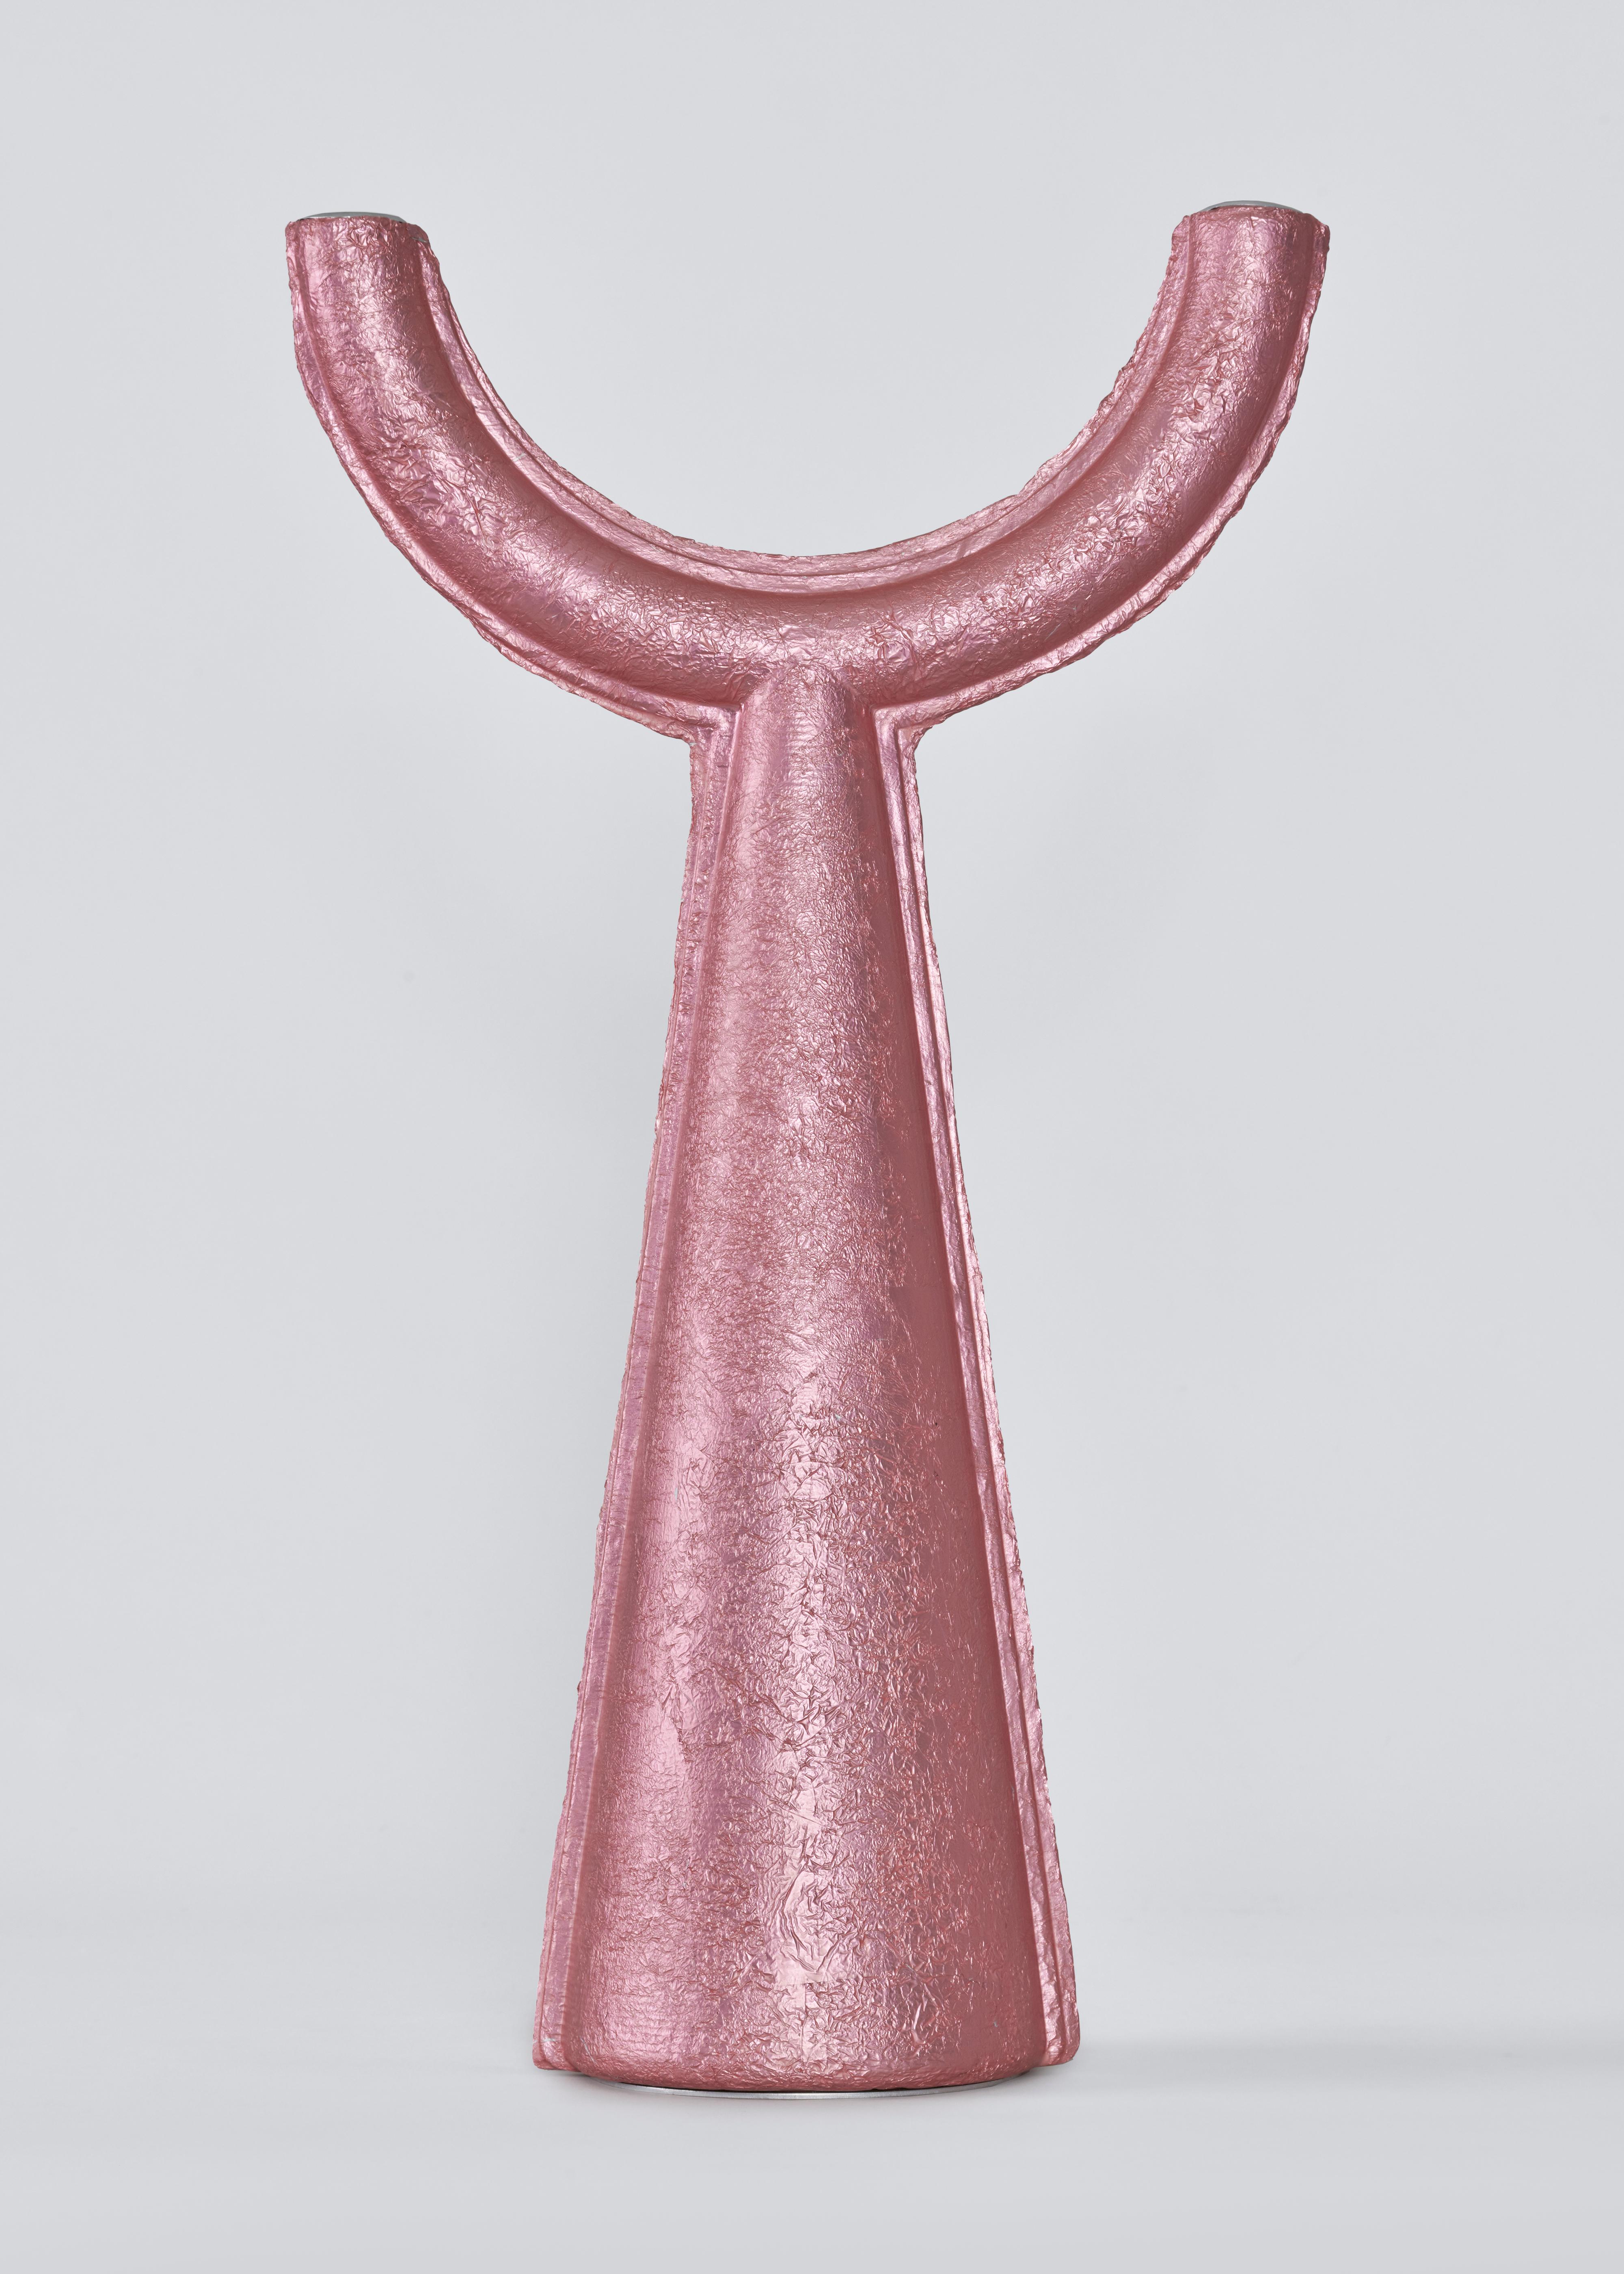 Dutch Contemporary Pressed Aluminium Chunk Candleholder in Pink by Ward Wijnant For Sale